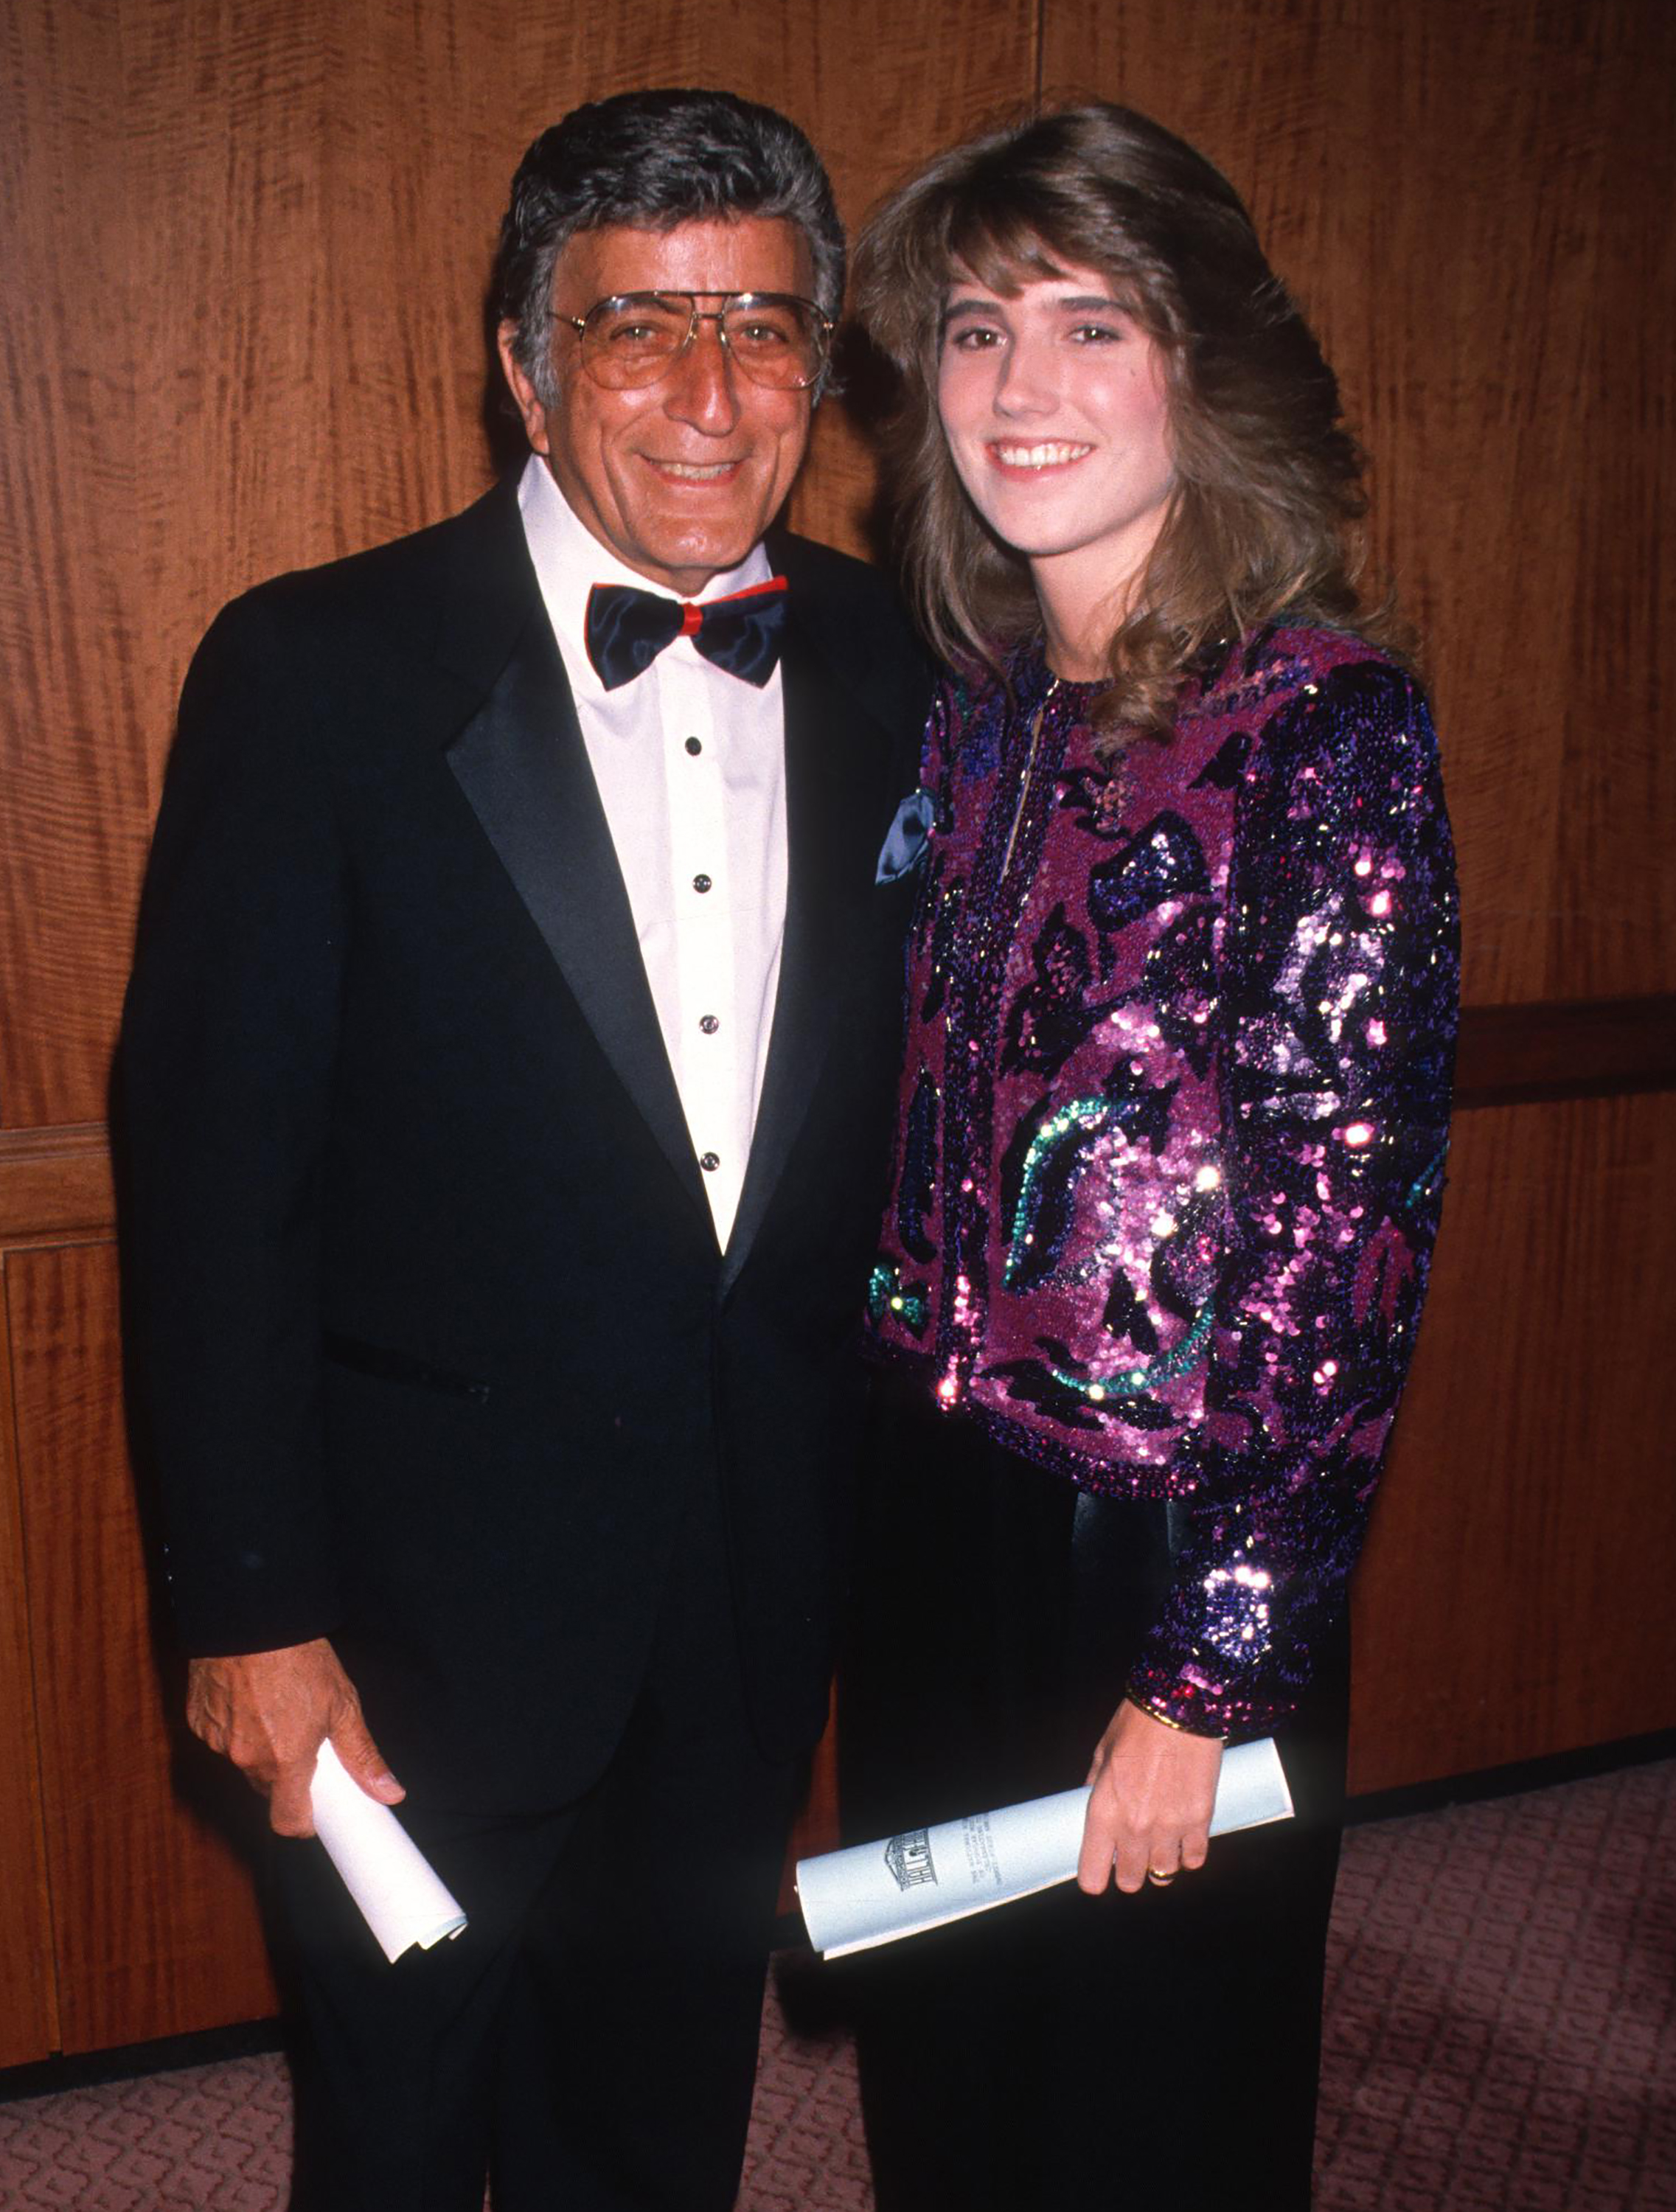 Tony Bennett and Susan Crow at the 21st annual Songwriters Hall of Fame Awards in New York on May 30, 1990 | Source: Getty Images